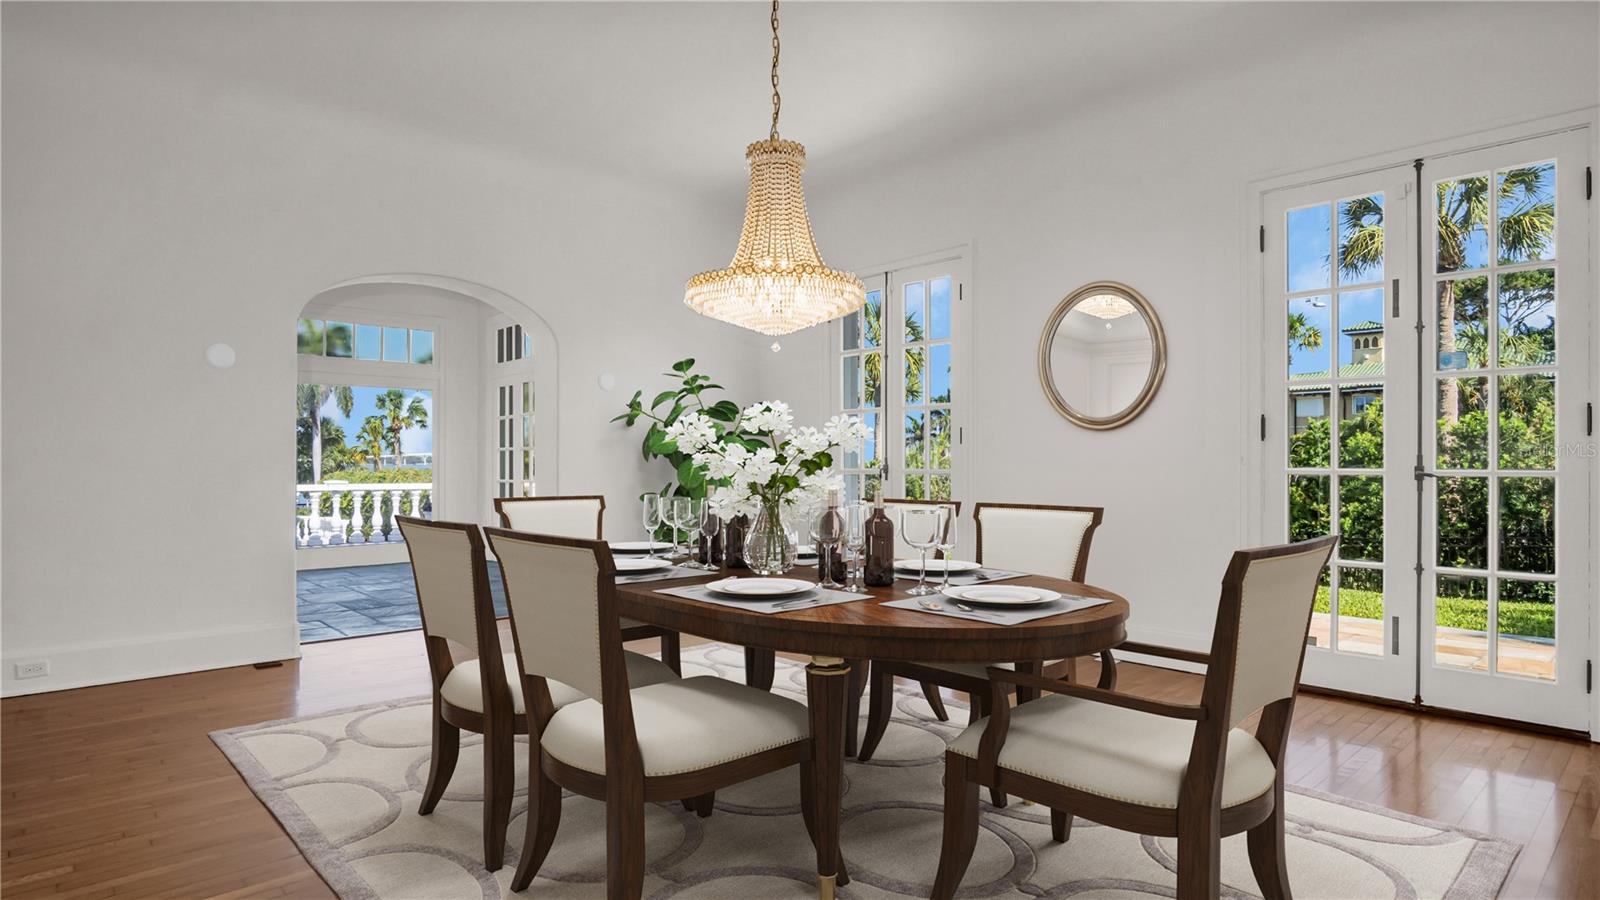 VIRTUAL STAGED Dining Room